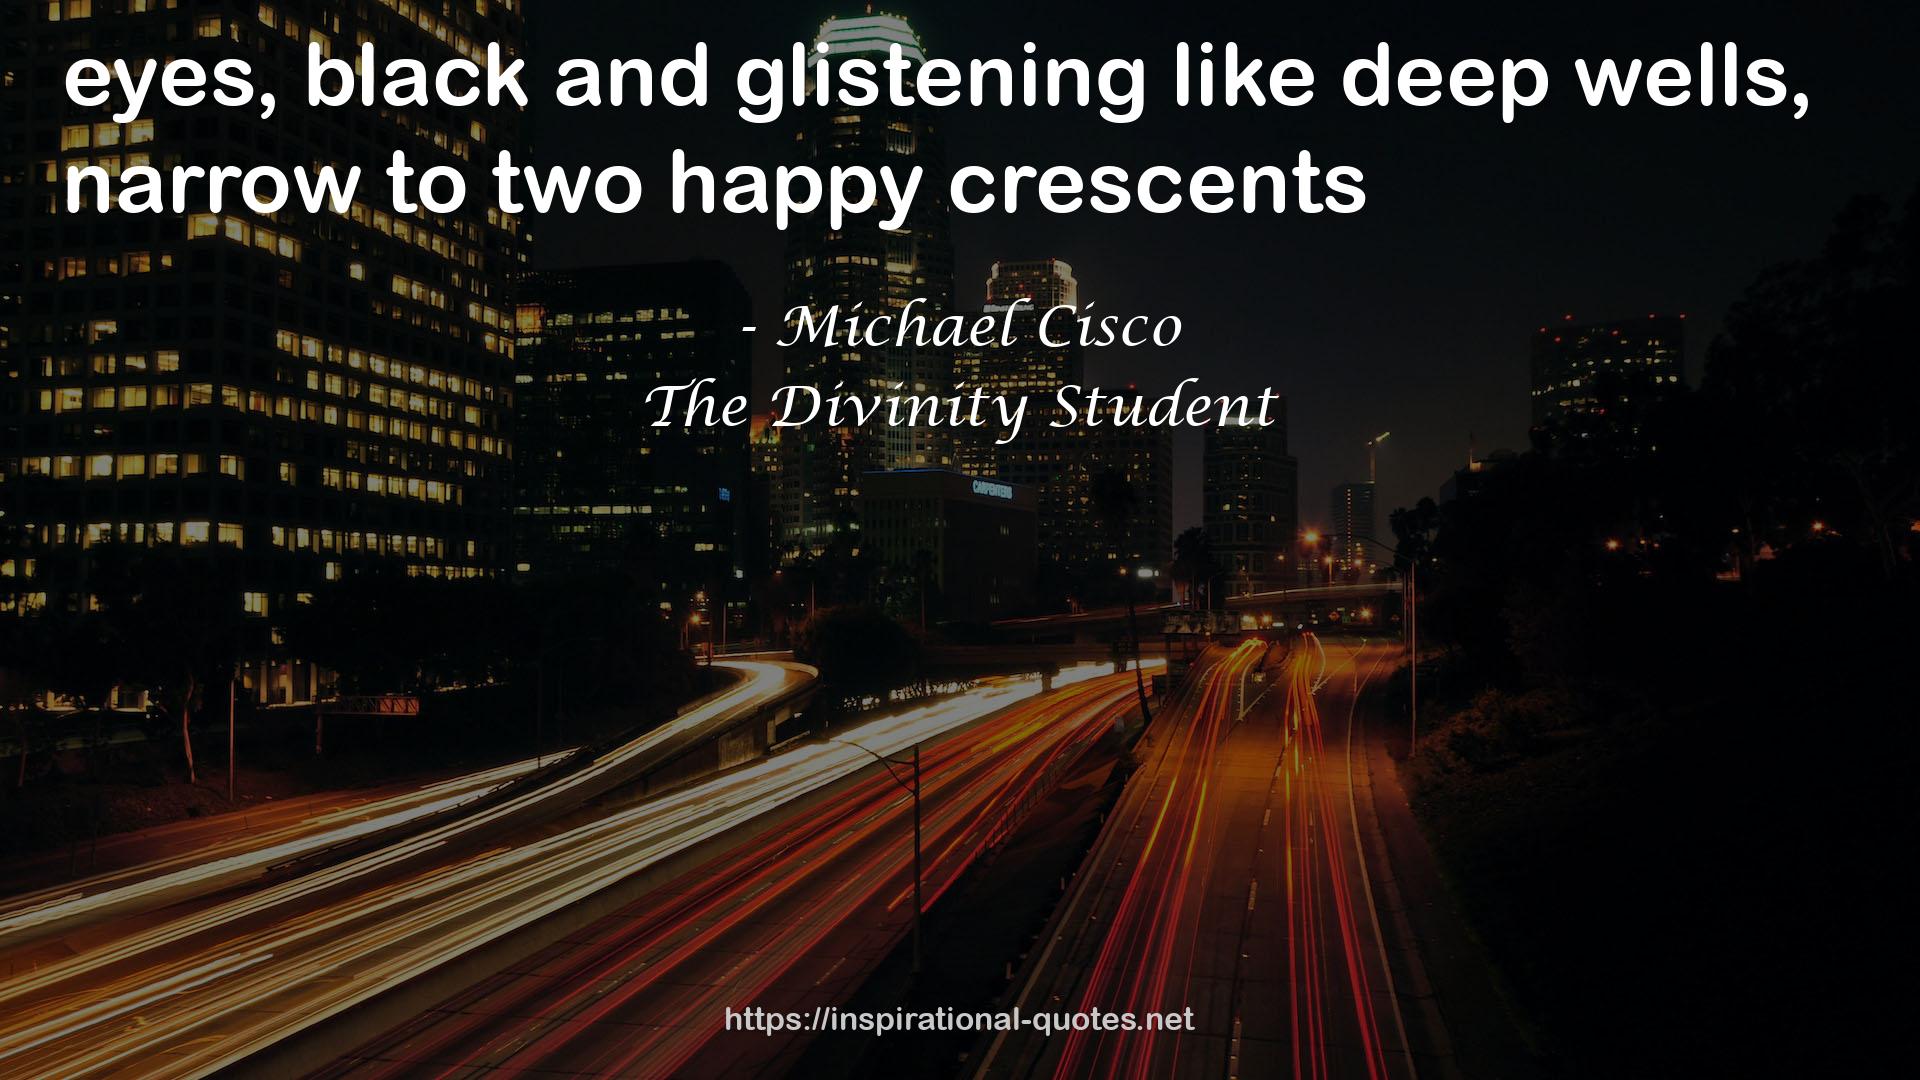 The Divinity Student QUOTES